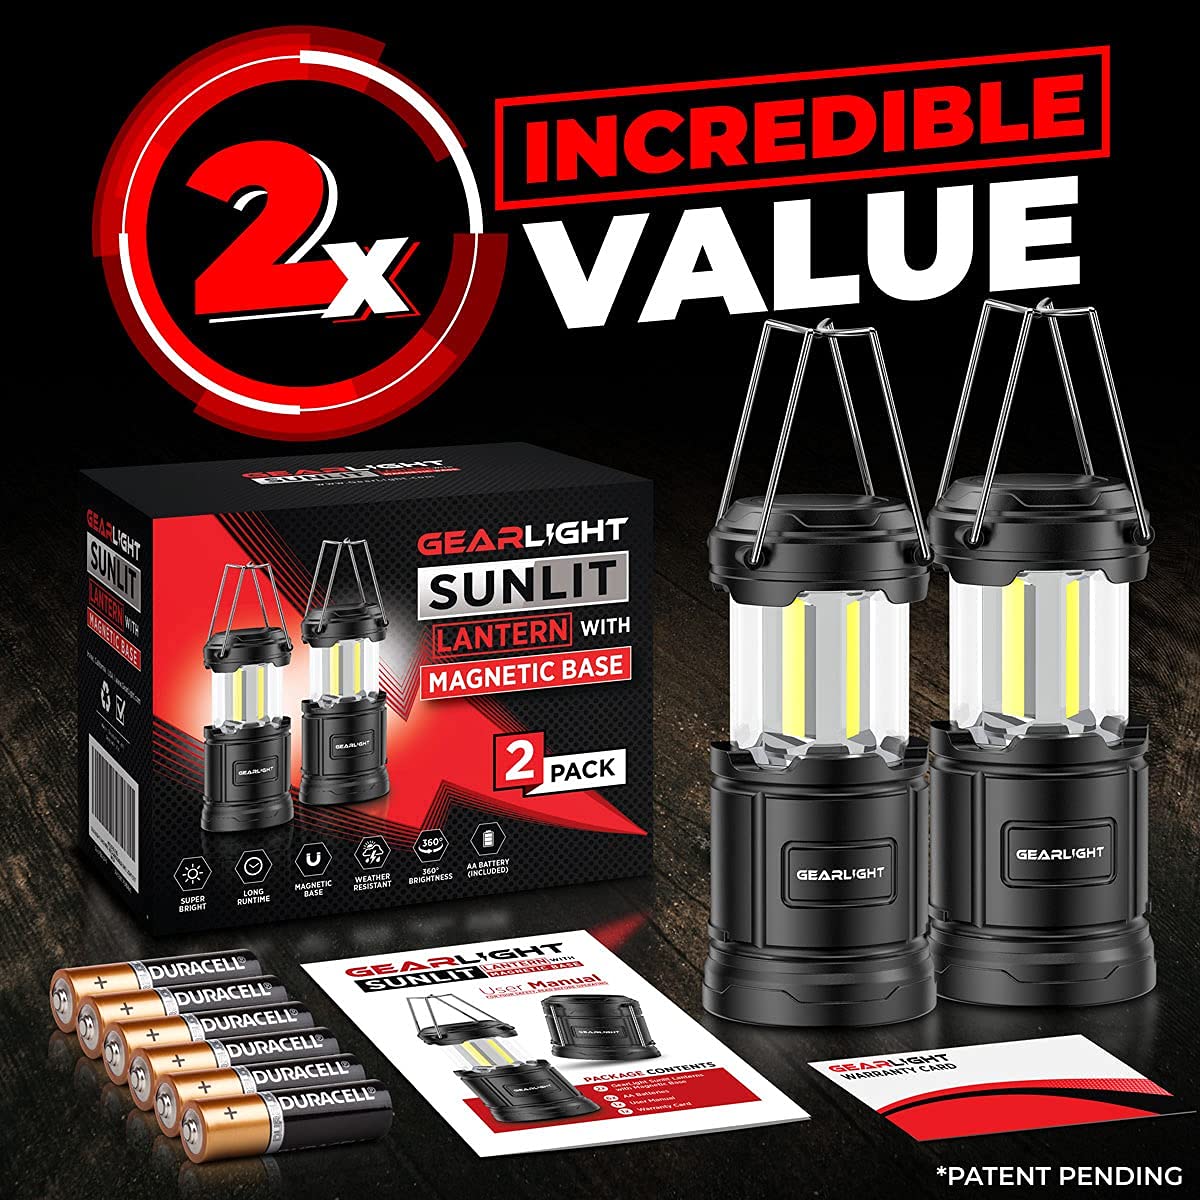 GearLight Camping Lantern - 2 Portable, LED Battery Powered Lamp Lights, Magnetic Base and Foldable Hook for Emergency Use or Campsites